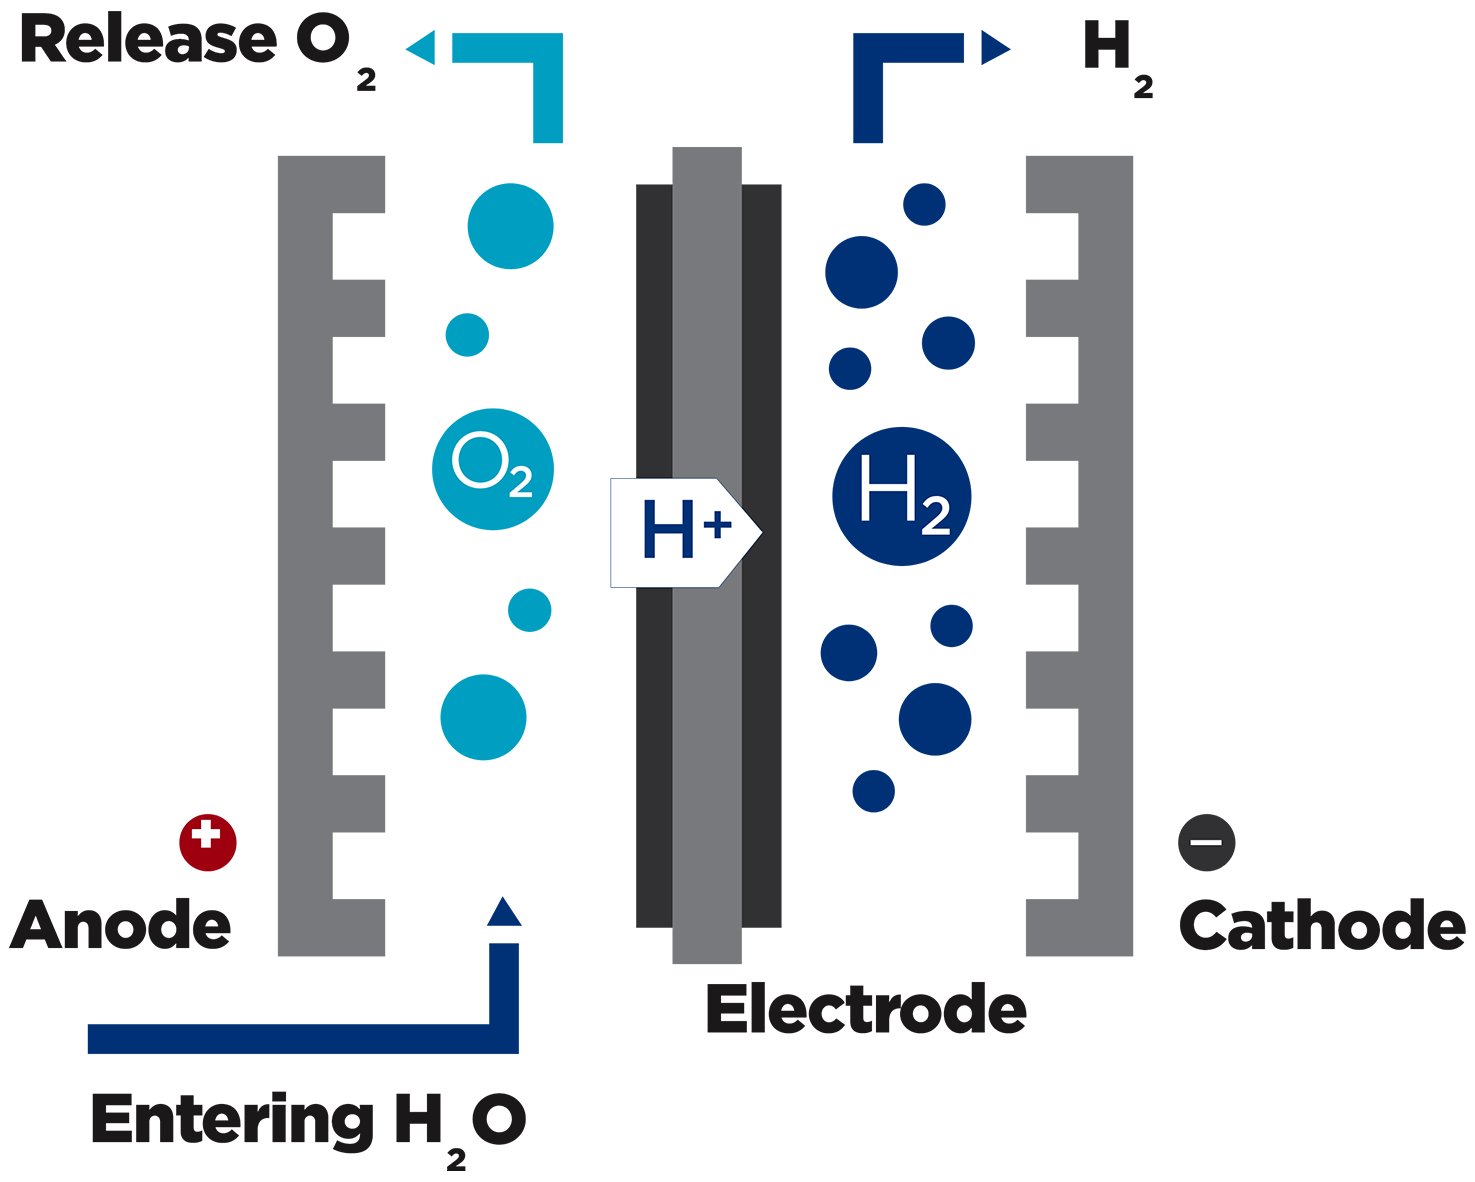 A unique technology to extract hydrogen from pure water, ensuring that only pure hydrogen is produced.